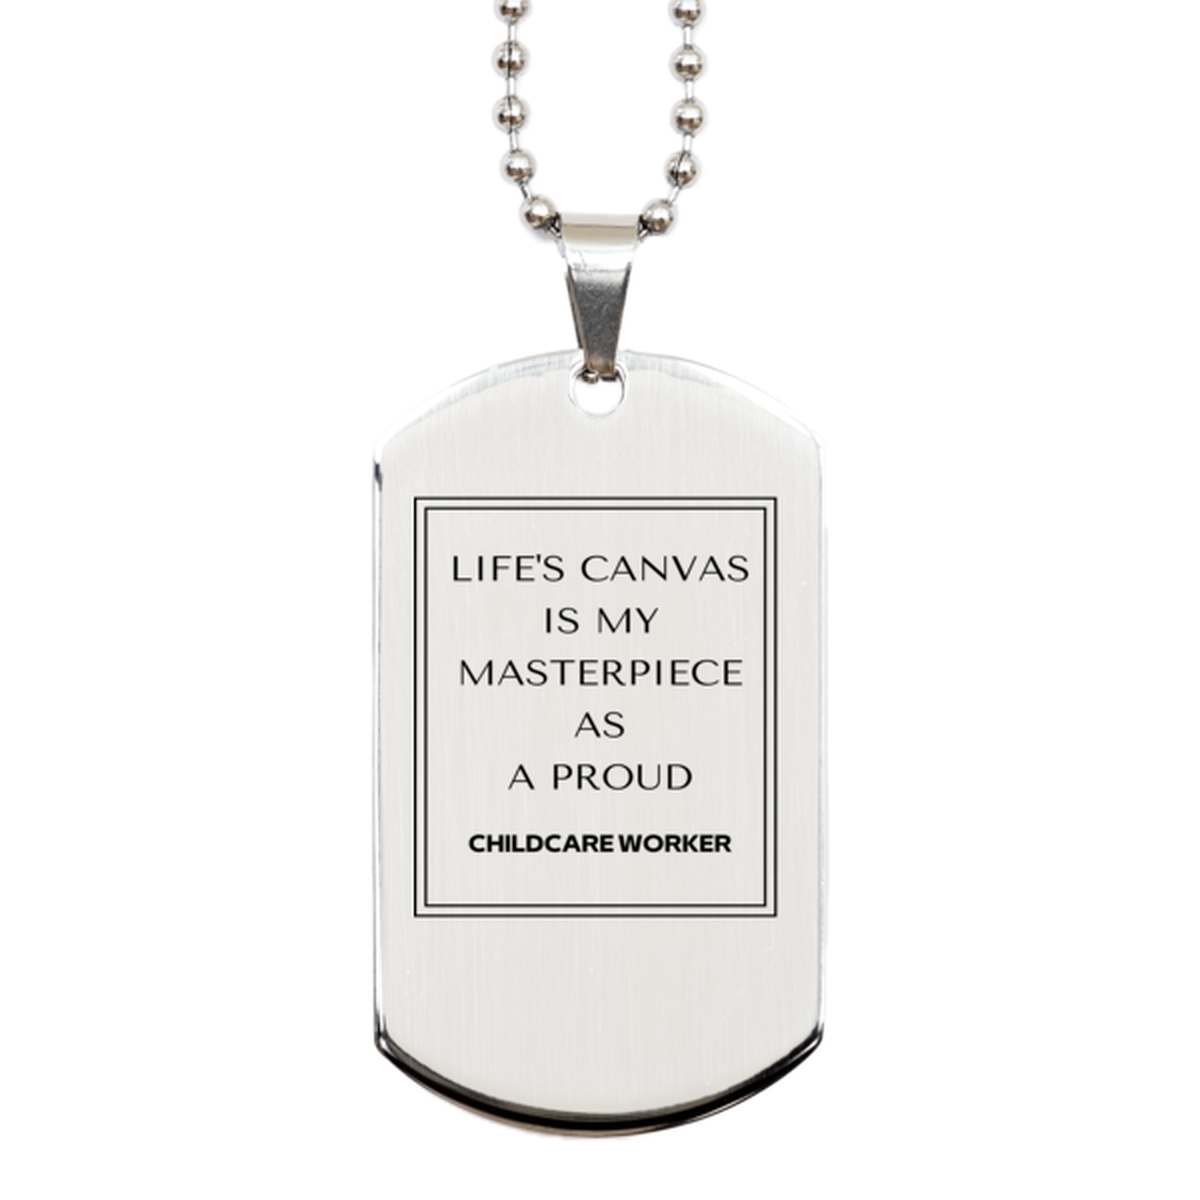 Proud Childcare Worker Gifts, Life's canvas is my masterpiece, Epic Birthday Christmas Unique Silver Dog Tag For Childcare Worker, Coworkers, Men, Women, Friends